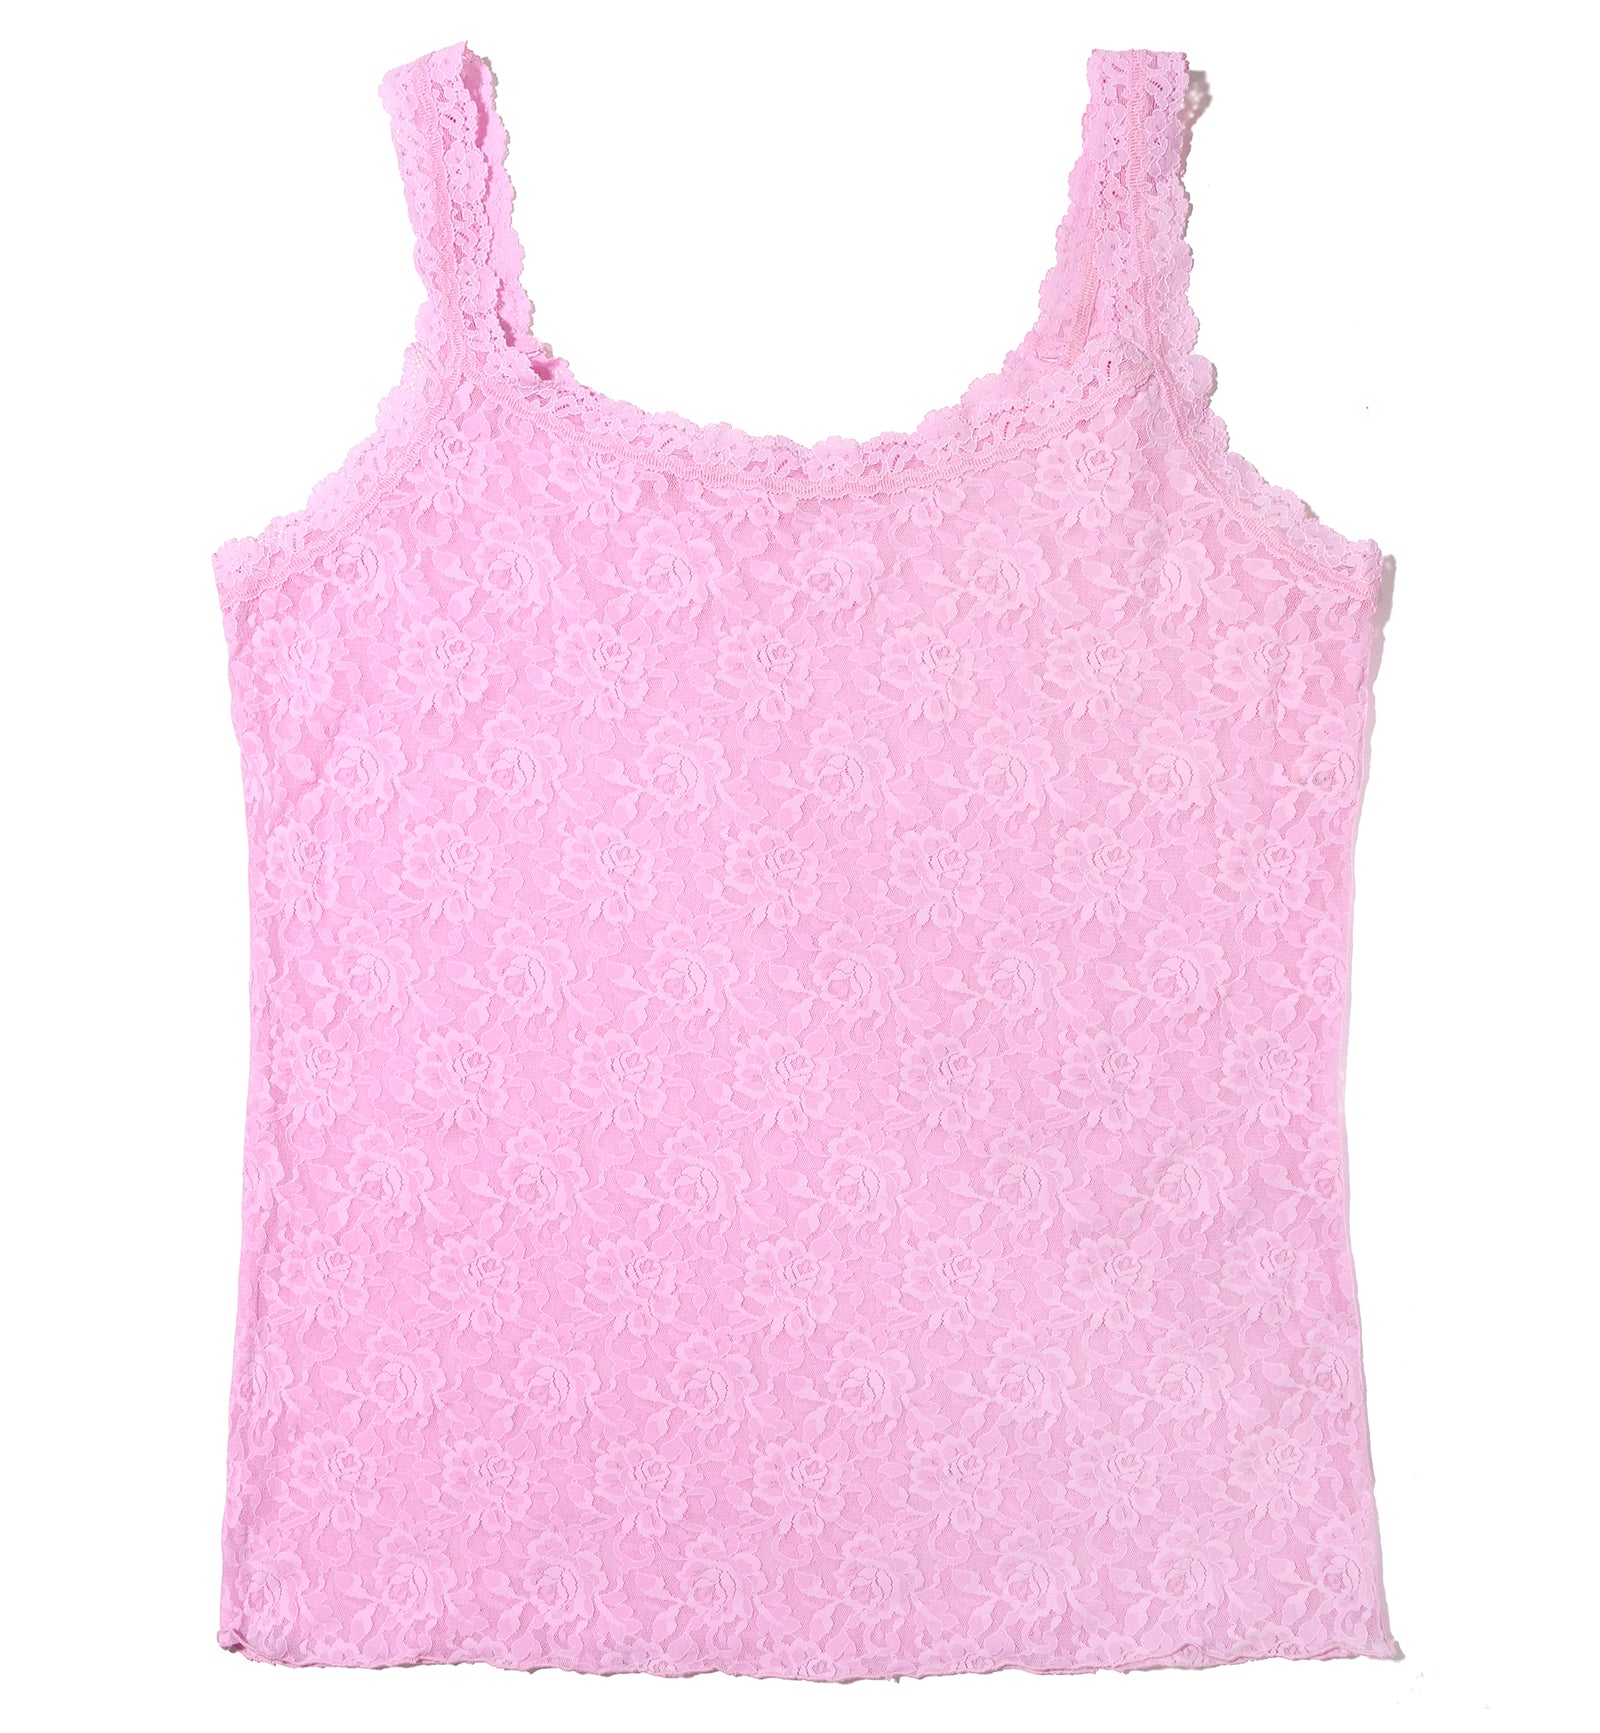 Hanky Panky Signature Lace Unlined Camisole PLUS (1390LX),1X,Cotton Candy - Cotton Candy,1X